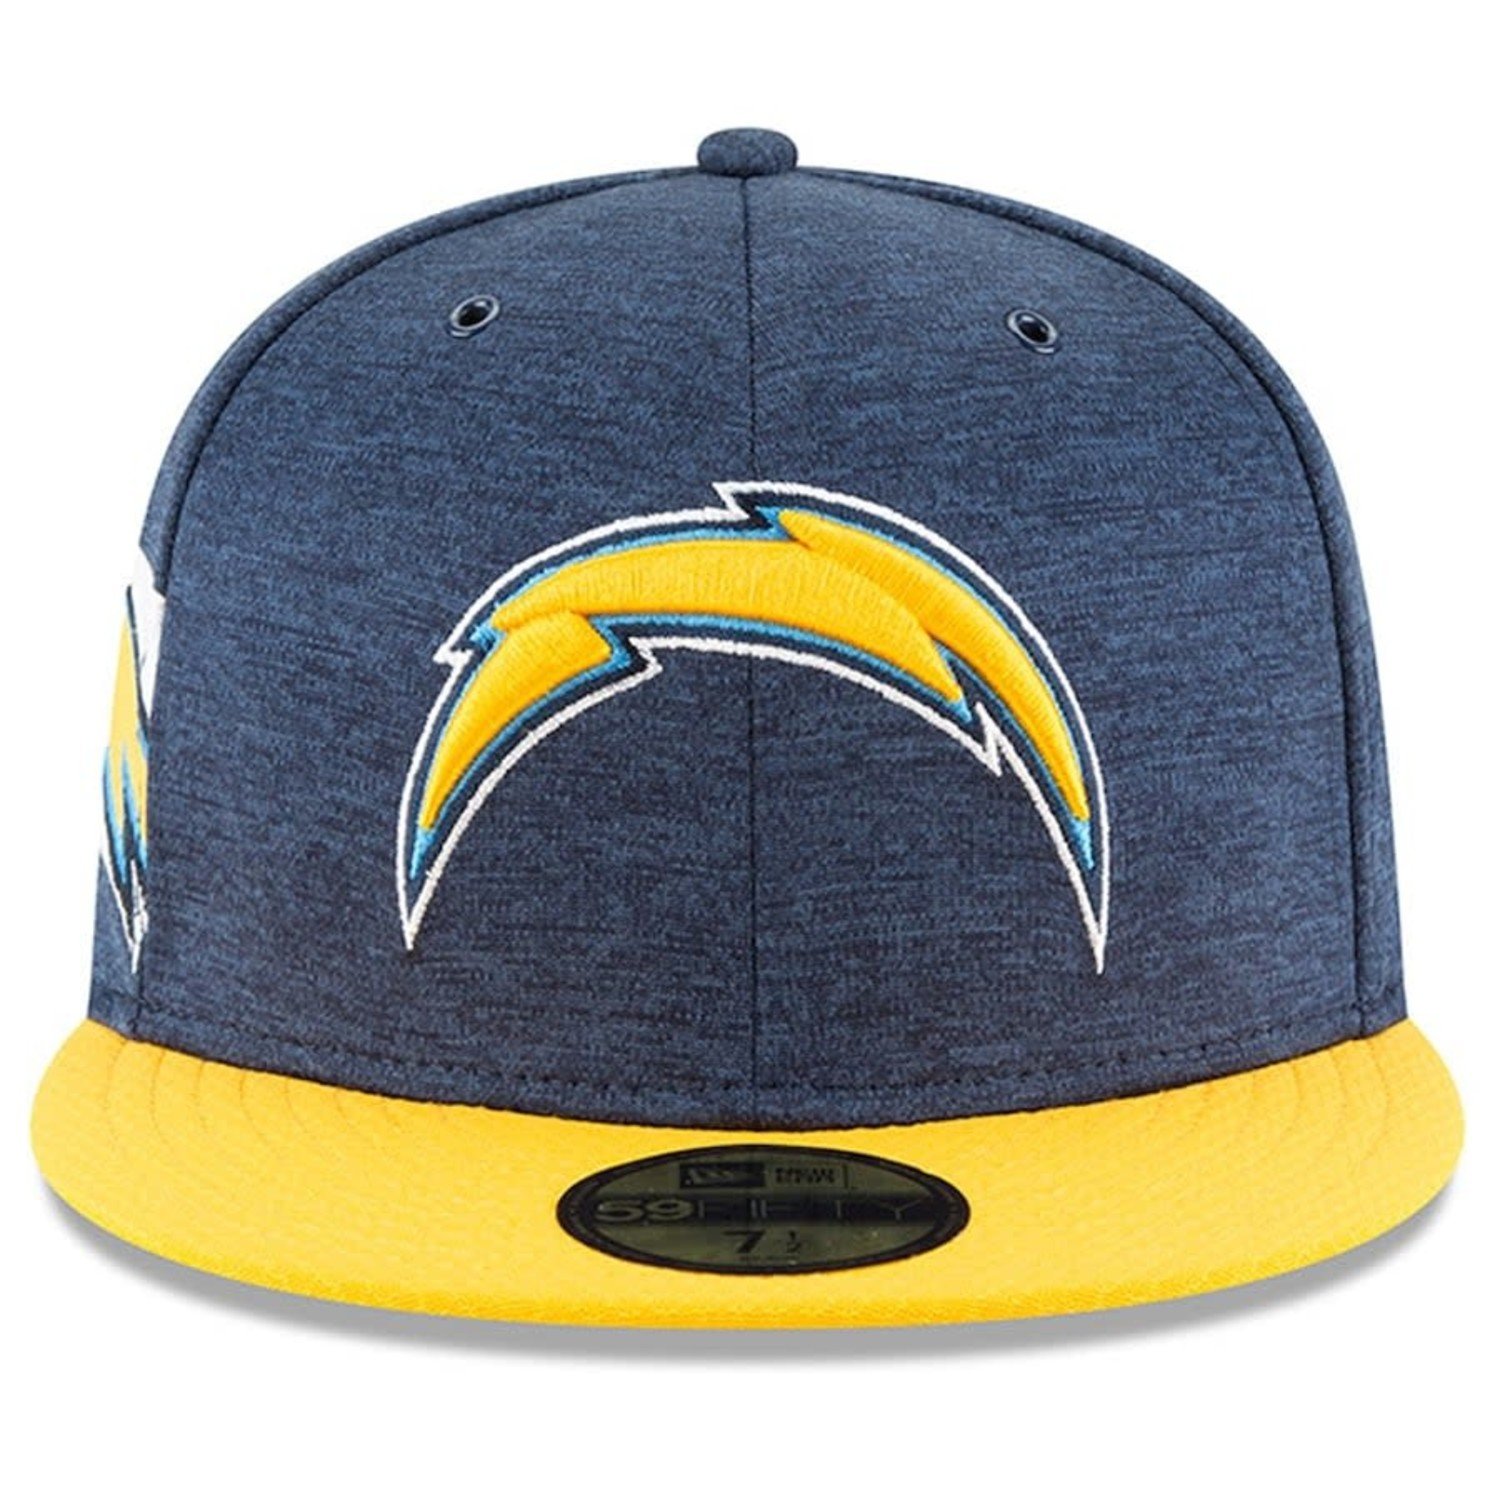 Los Angeles Chargers Home Decor, Chargers Office Supplies, Home